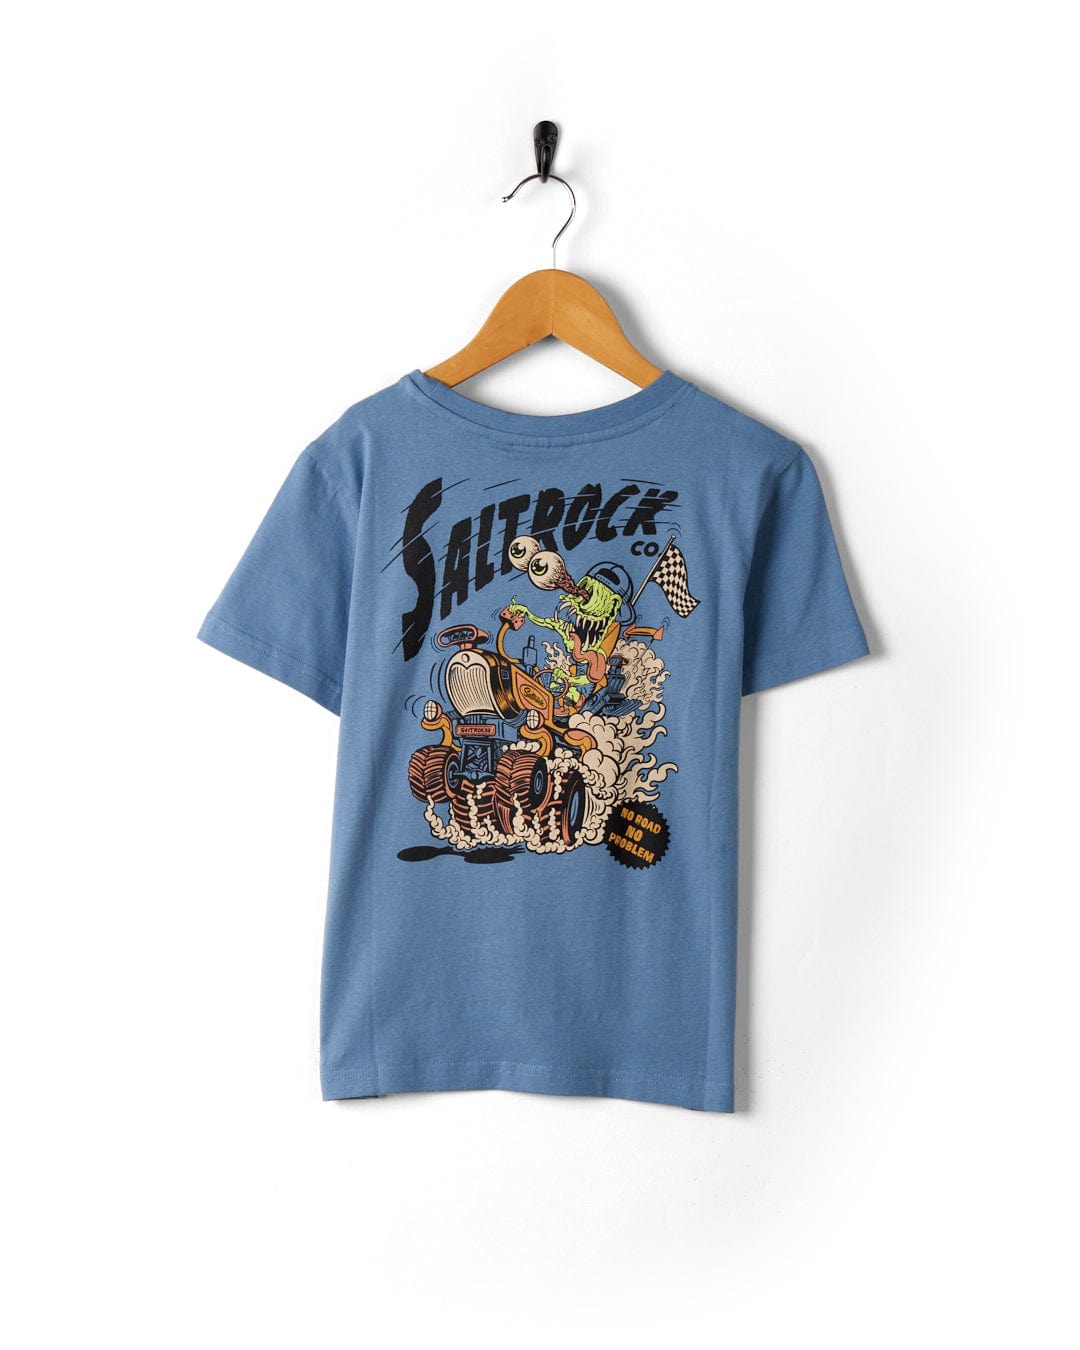 A Saltrock blue cotton t-shirt with an image of a boy riding a motorcycle.